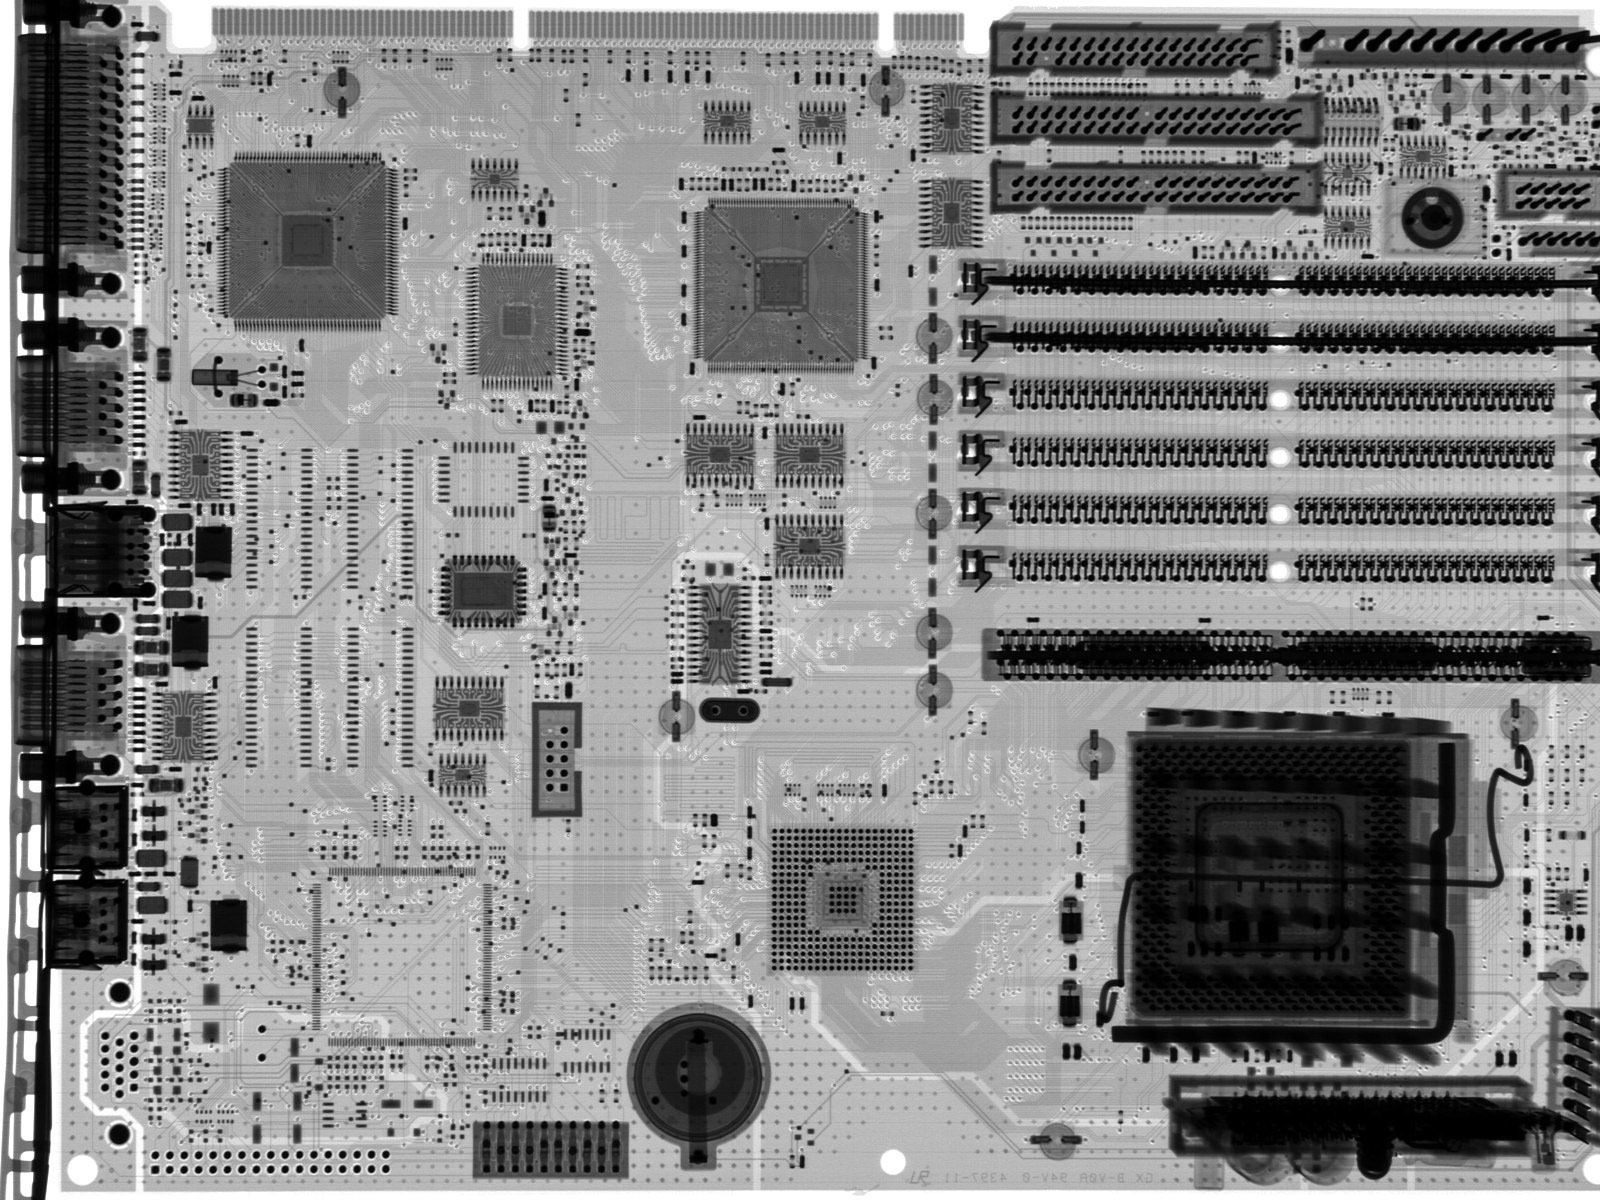 An X-ray image of a motherboard